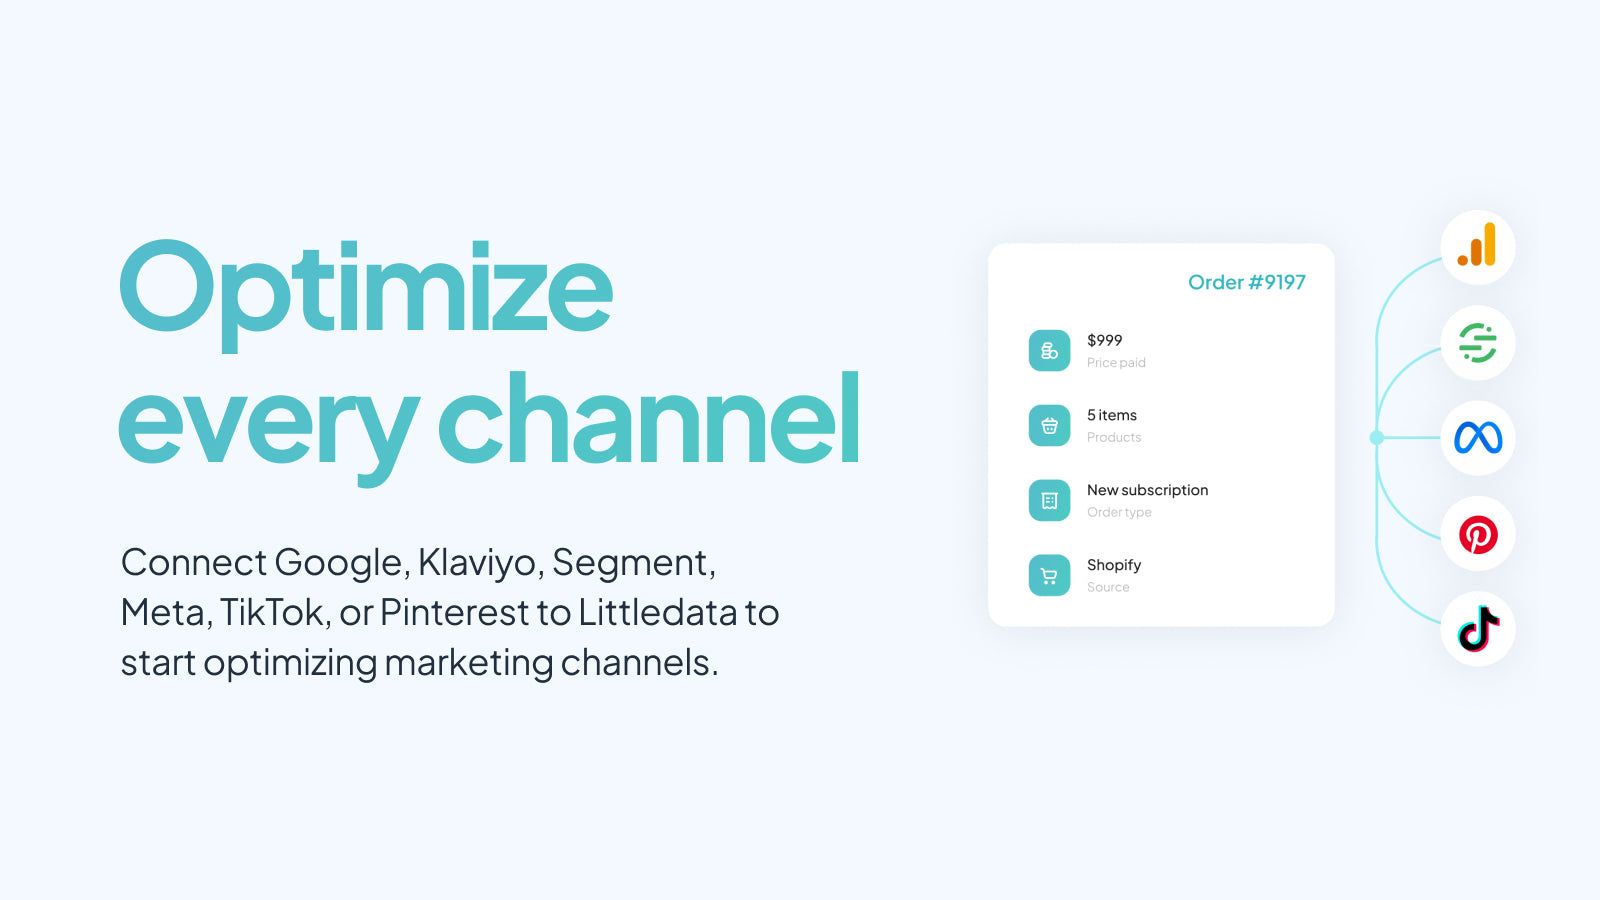 Optimize every channel by connecting to ga4, klaviyo, segment.